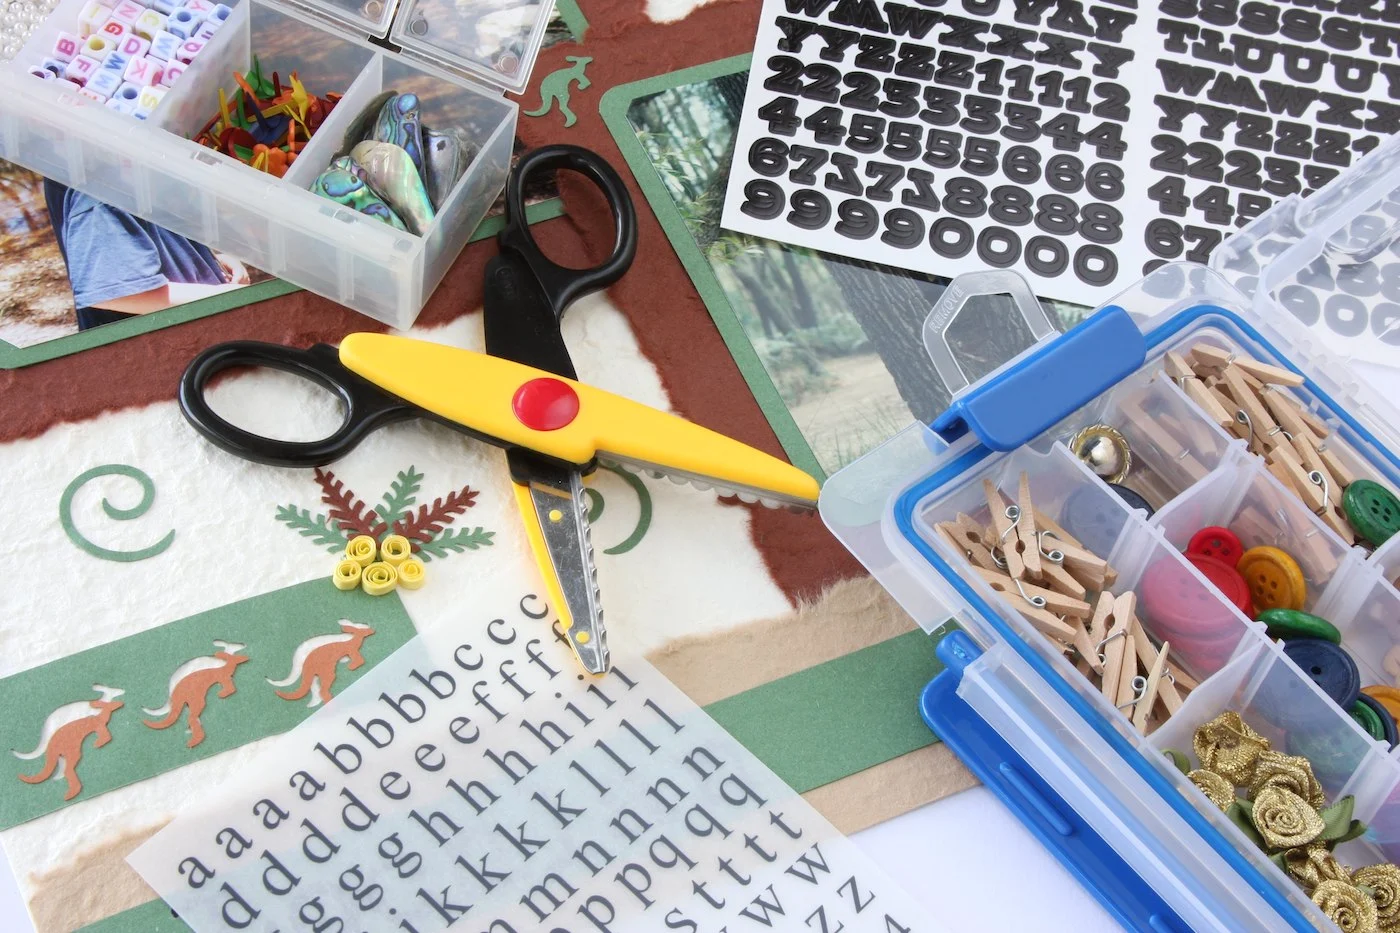 Craft-supplies-including-stickers-and-decorative-scissors-laying-on-a-work-surface